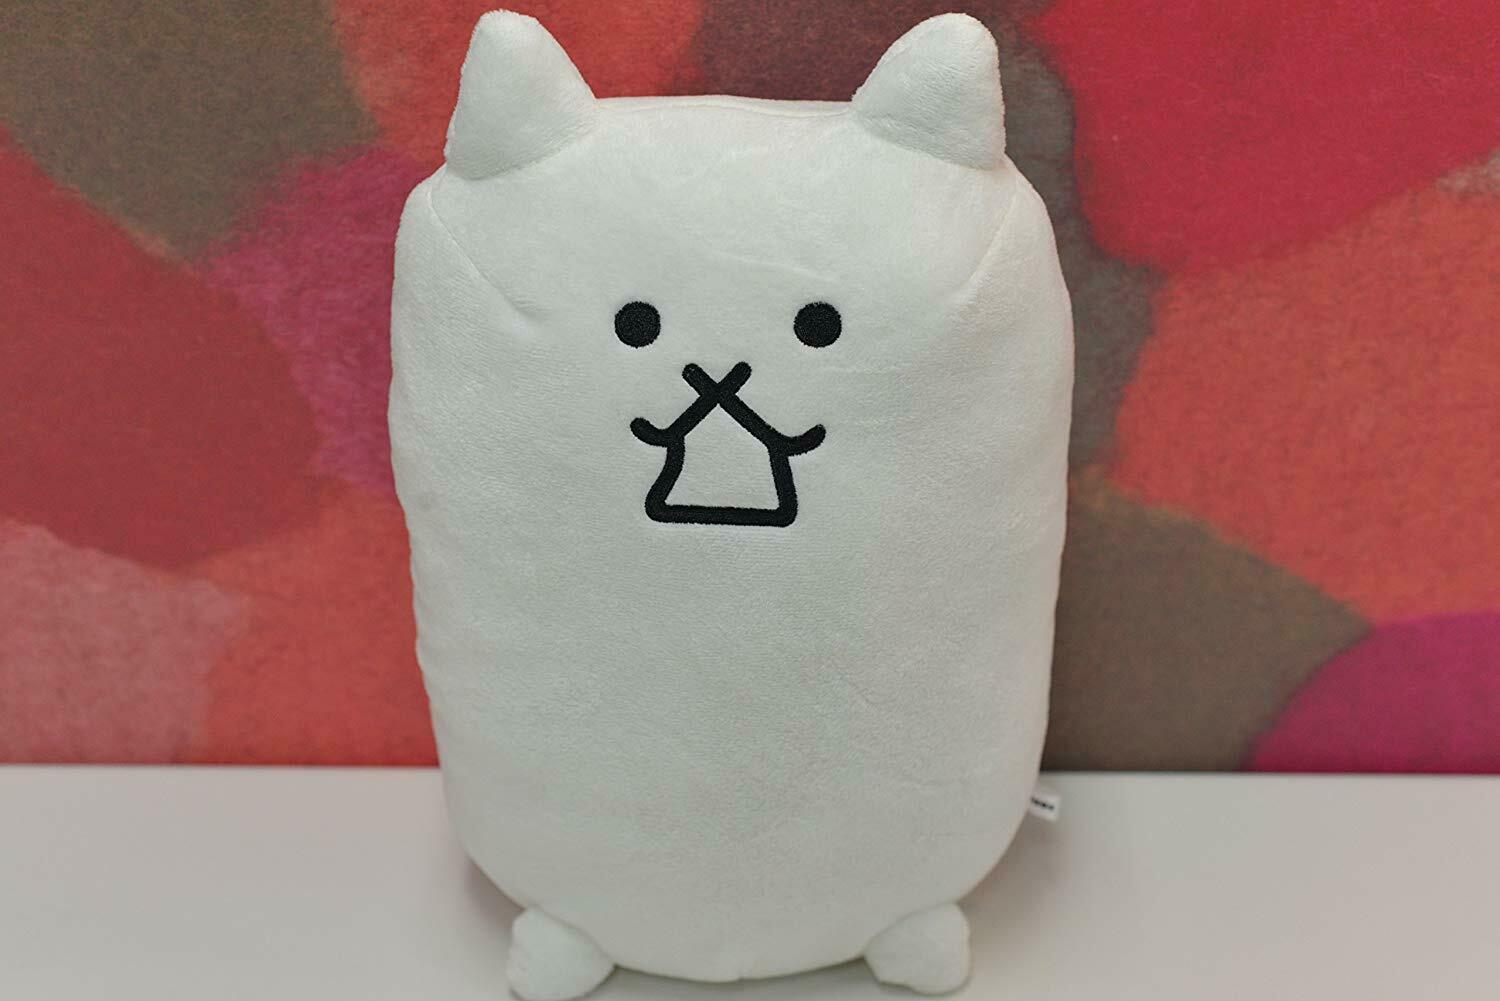 the battle cats plush toy